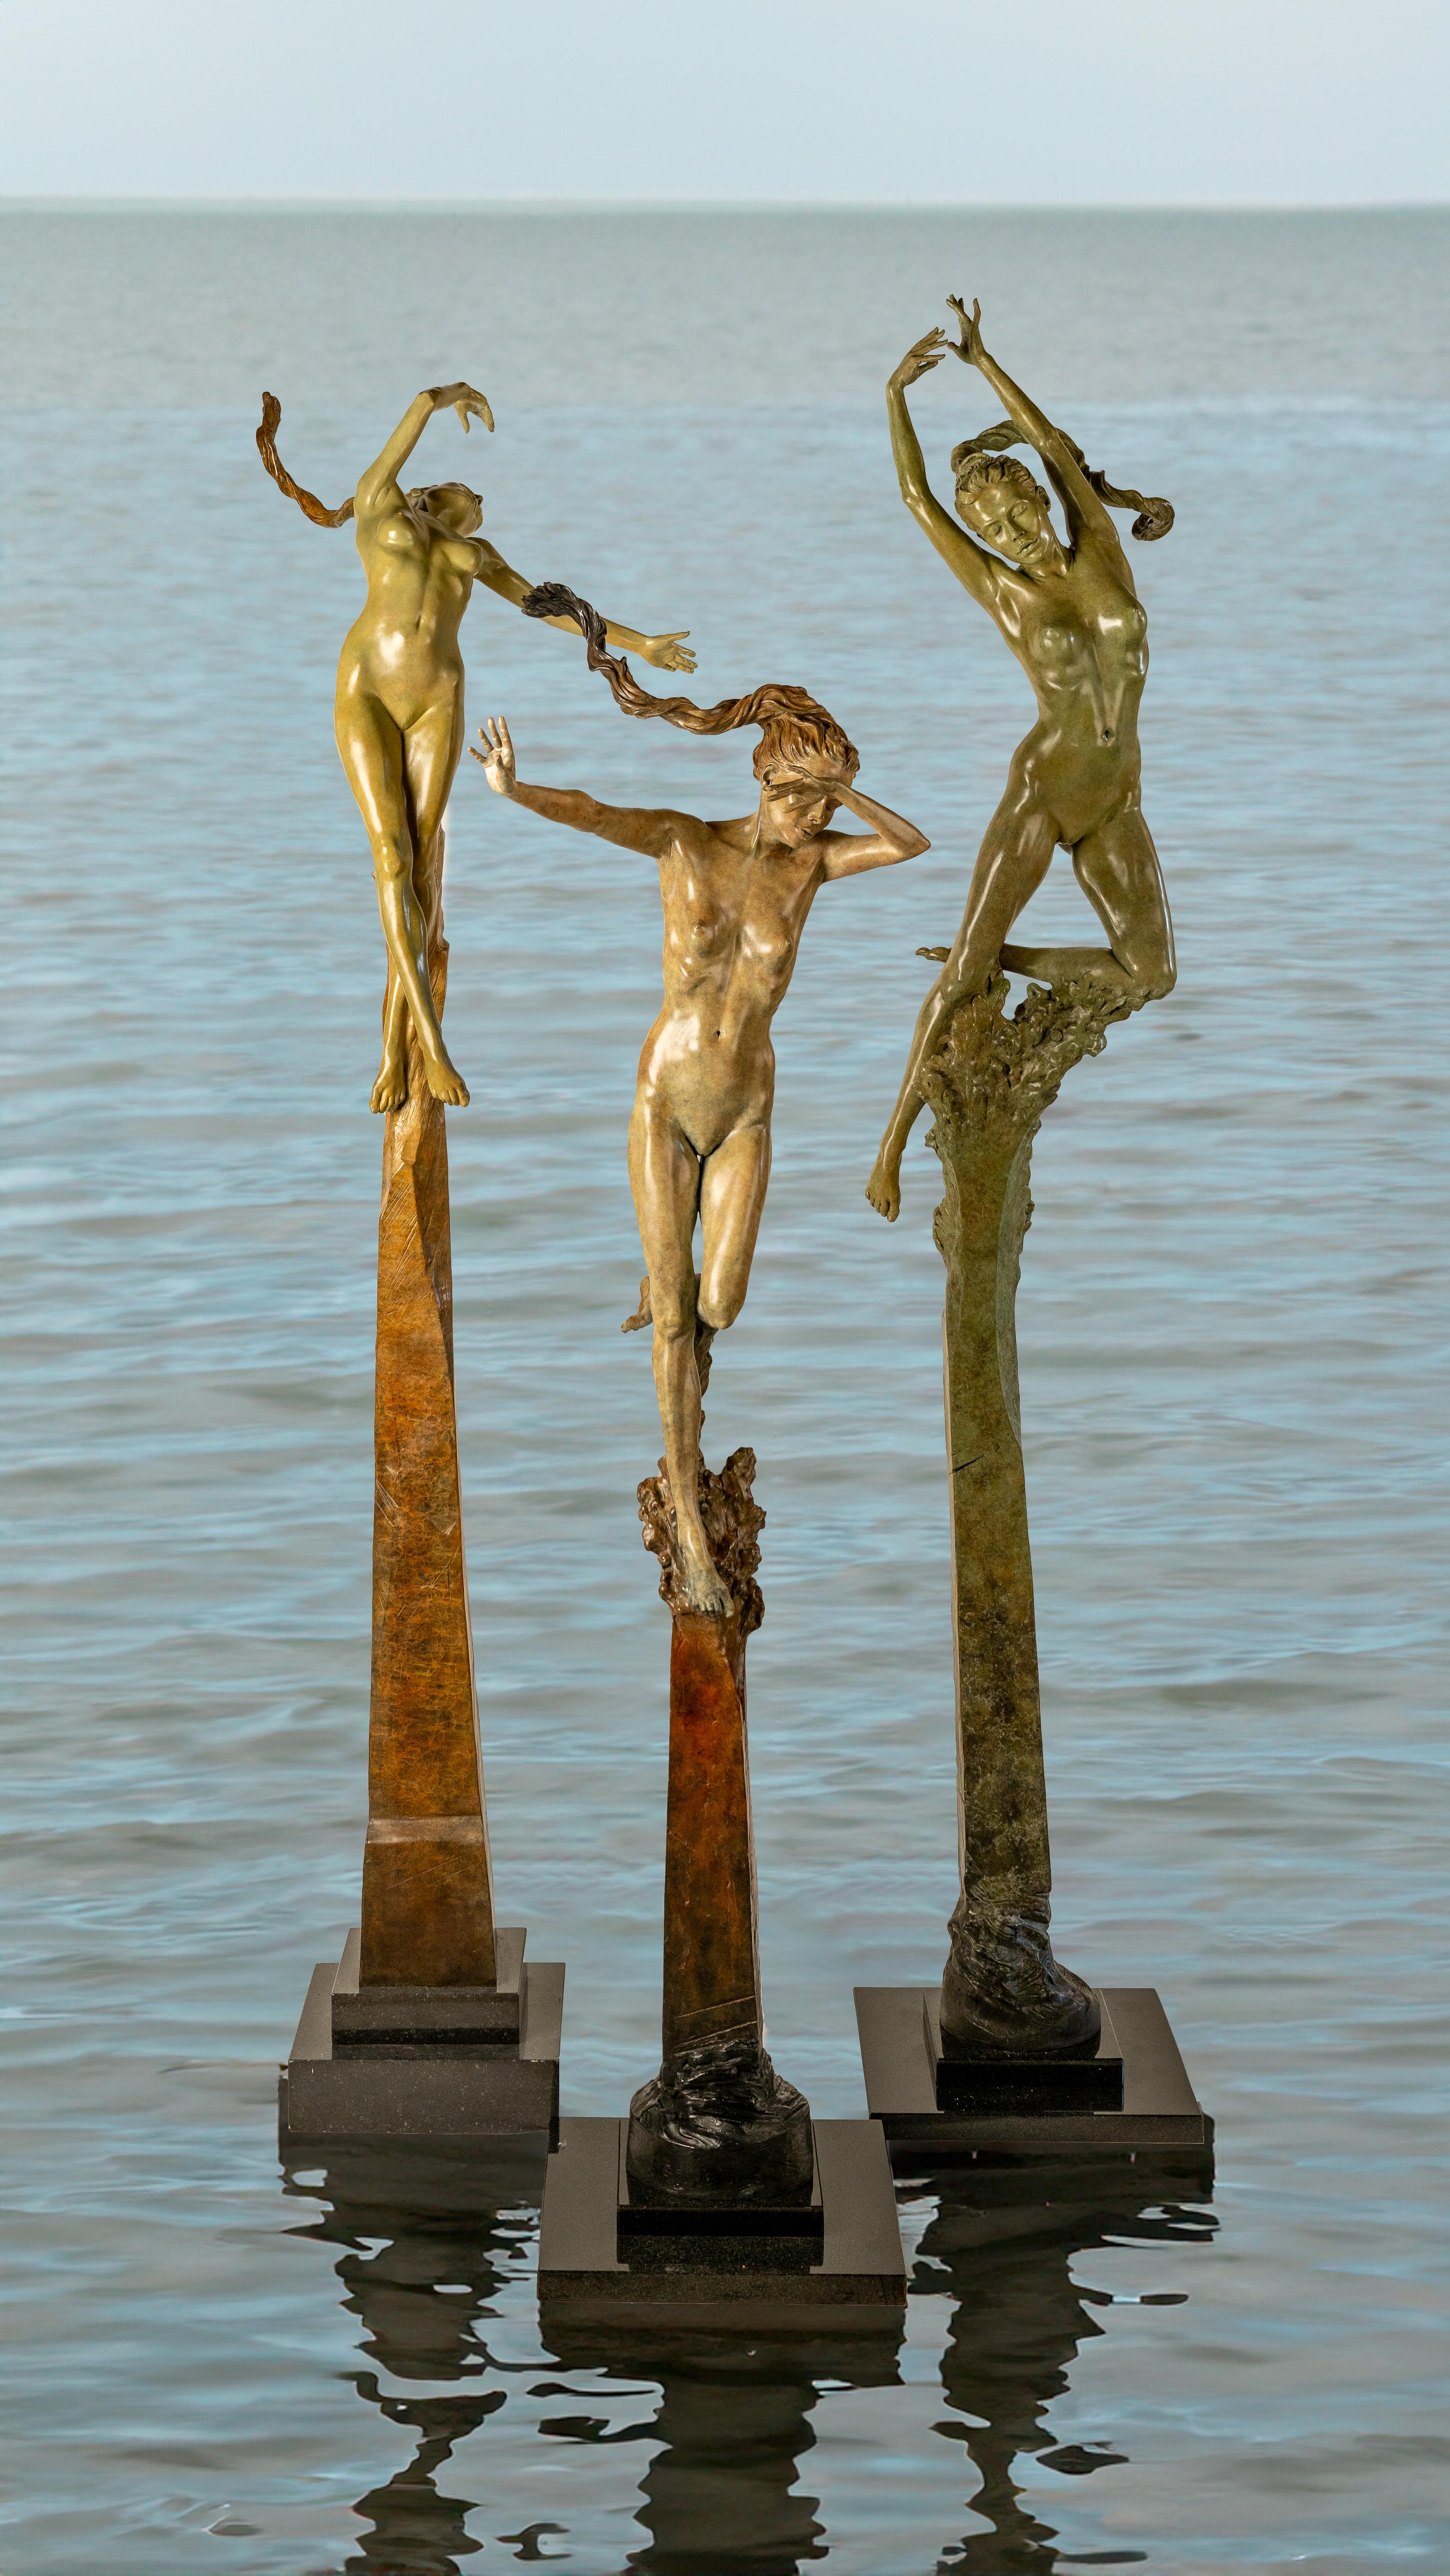 'Athena the Goddess of Wisdom' by Carl Payne is a stunning Contemporary Nude Bronze Sculpture.

Continuing a successful career in England and Ireland, Carl joined Callaghan Fine Paintings and Works of Art at the beginning of 2004 in order to